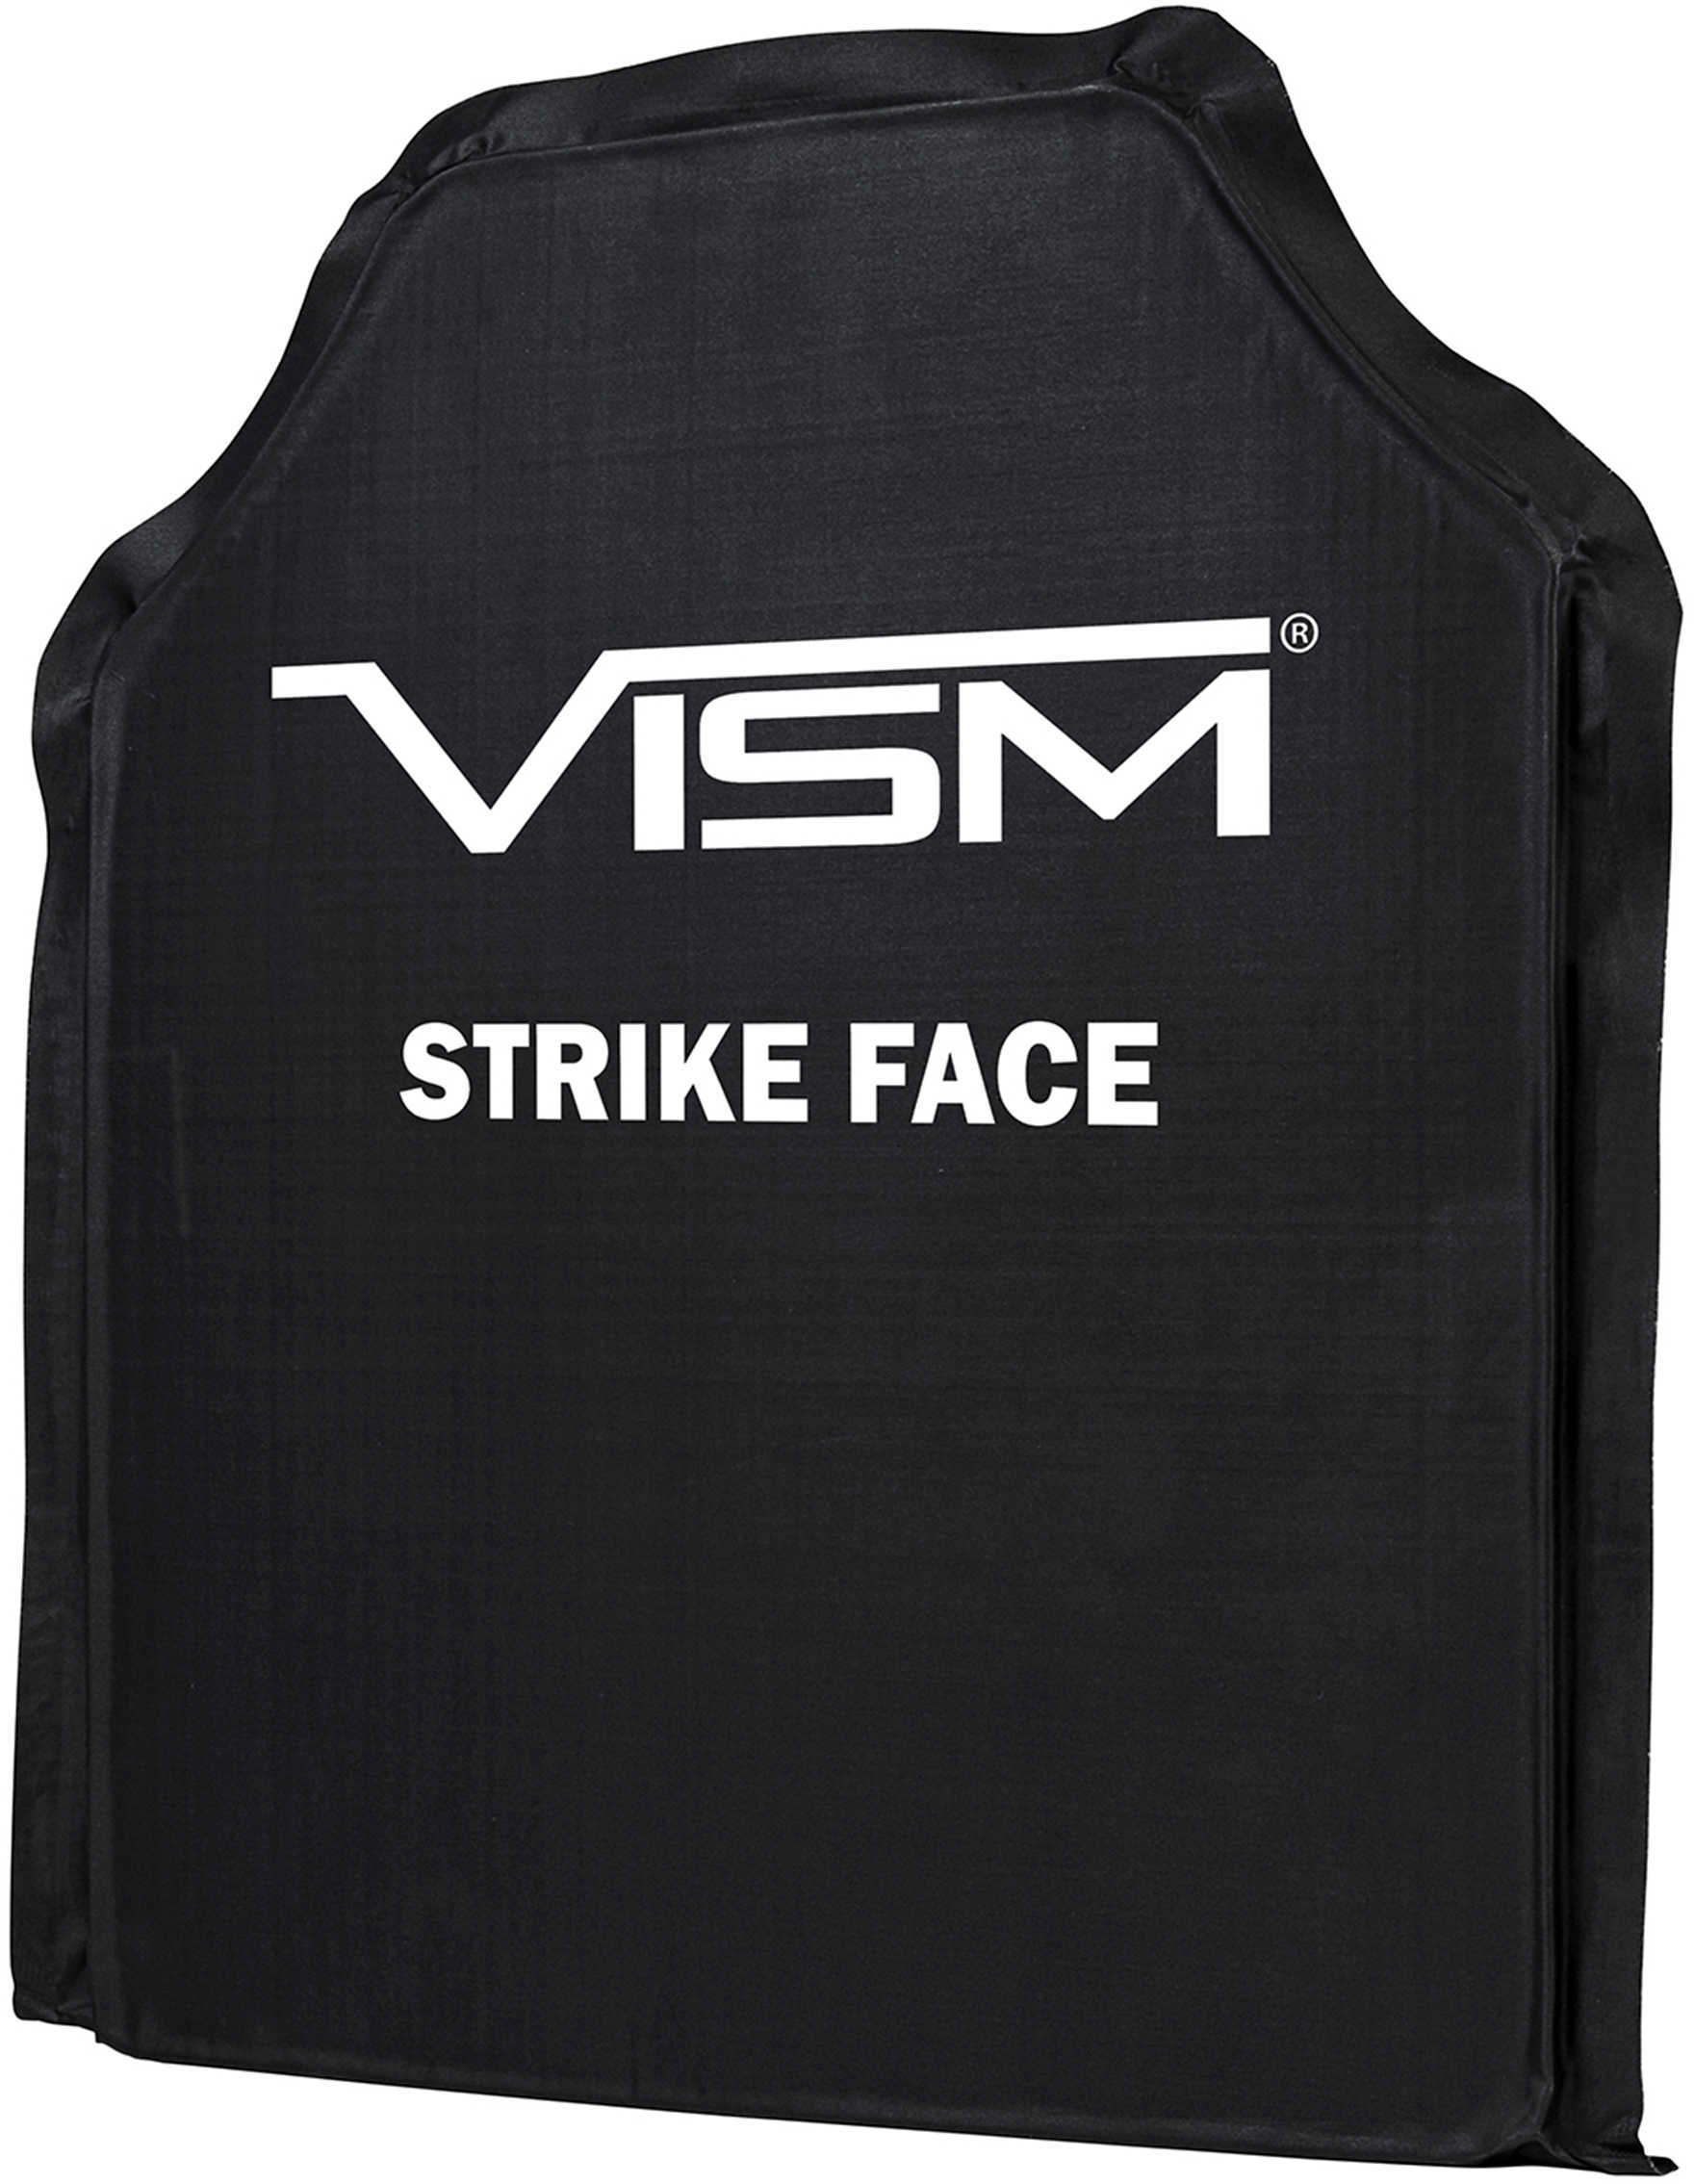 Vism Soft Ballistic Panel 10 in x 12 in Shooters Cut